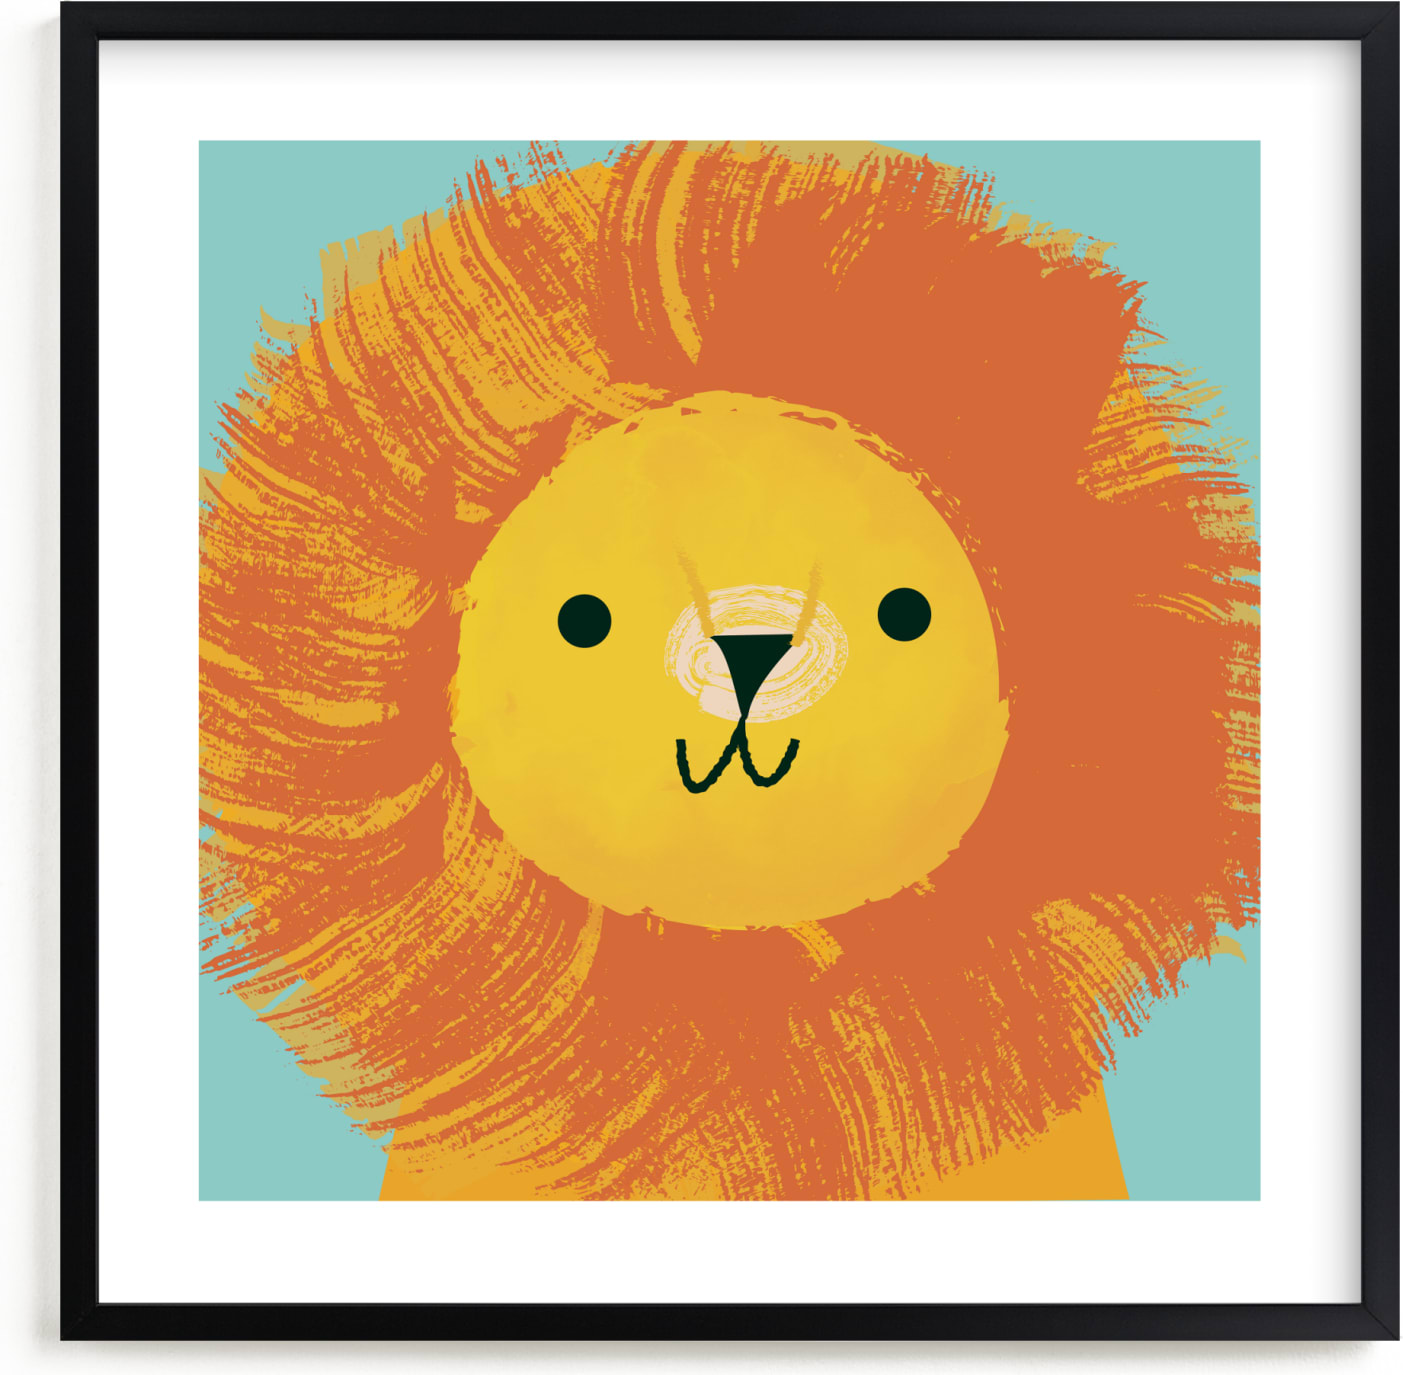 This is a yellow nursery wall art by Lori Wemple called King Of The Jungle.